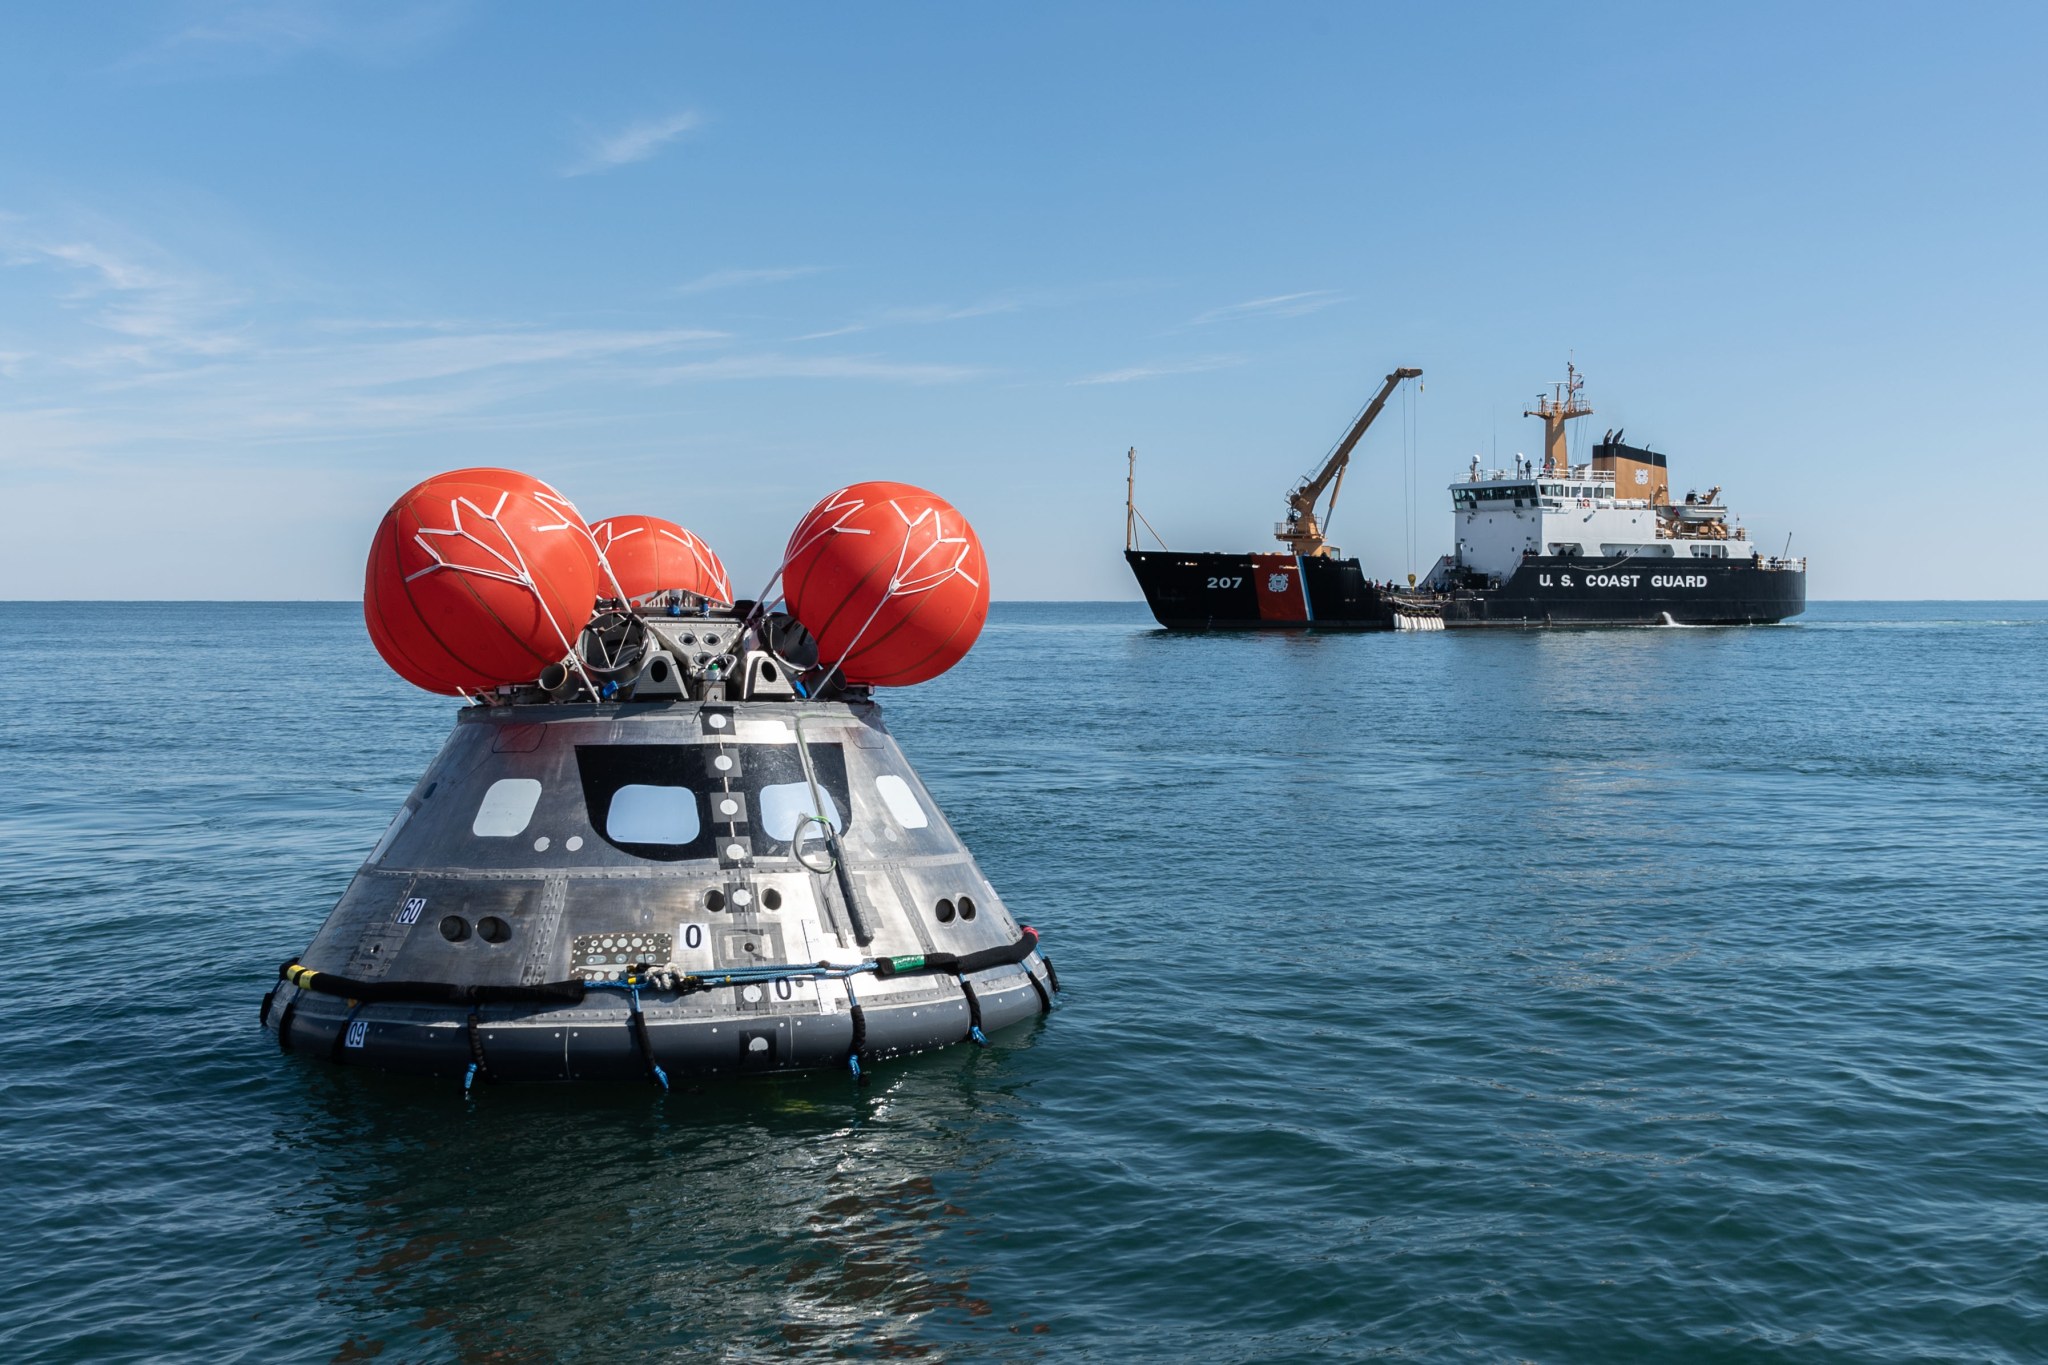 NASA tested Orion’s crew module uprighting system